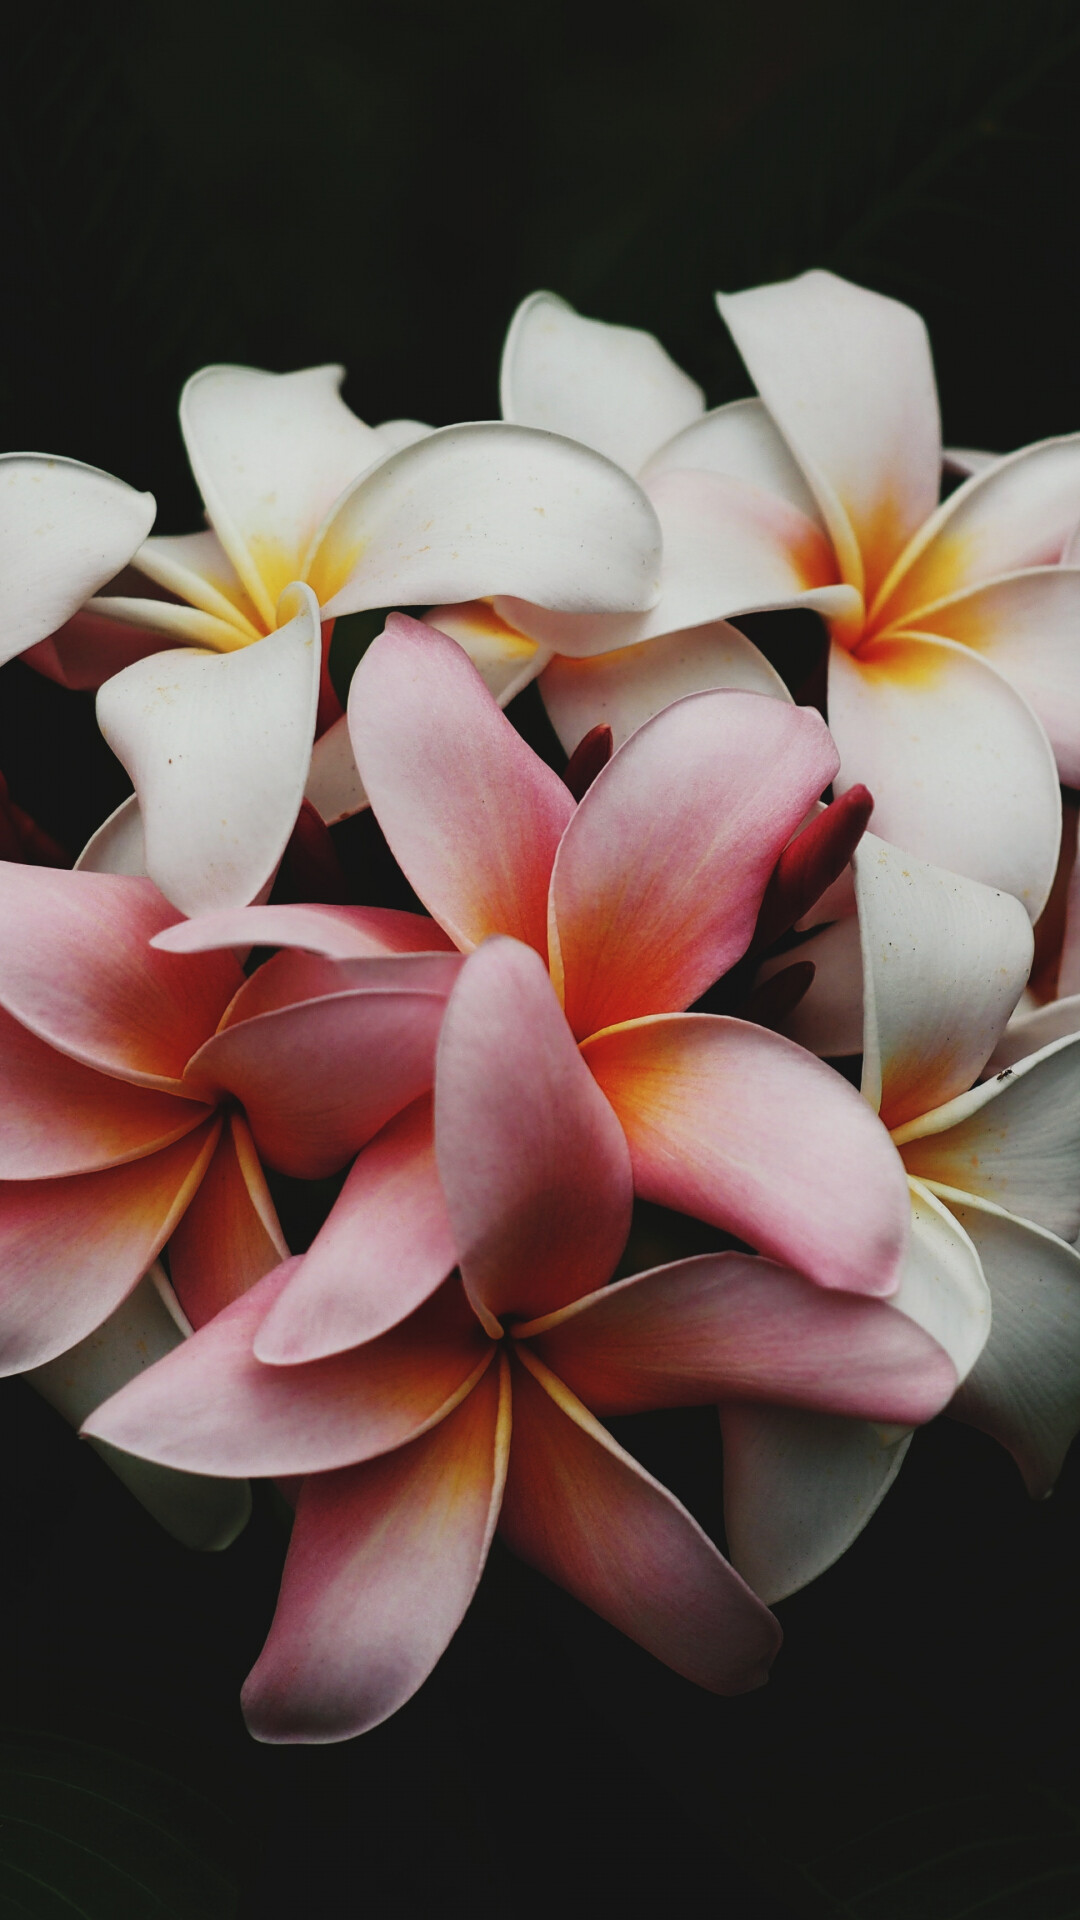 iPhone wallpaper Plumeria flowers, Stunning floral display, Nature's serenade, Blossom enchantment, 1080x1920 Full HD Phone